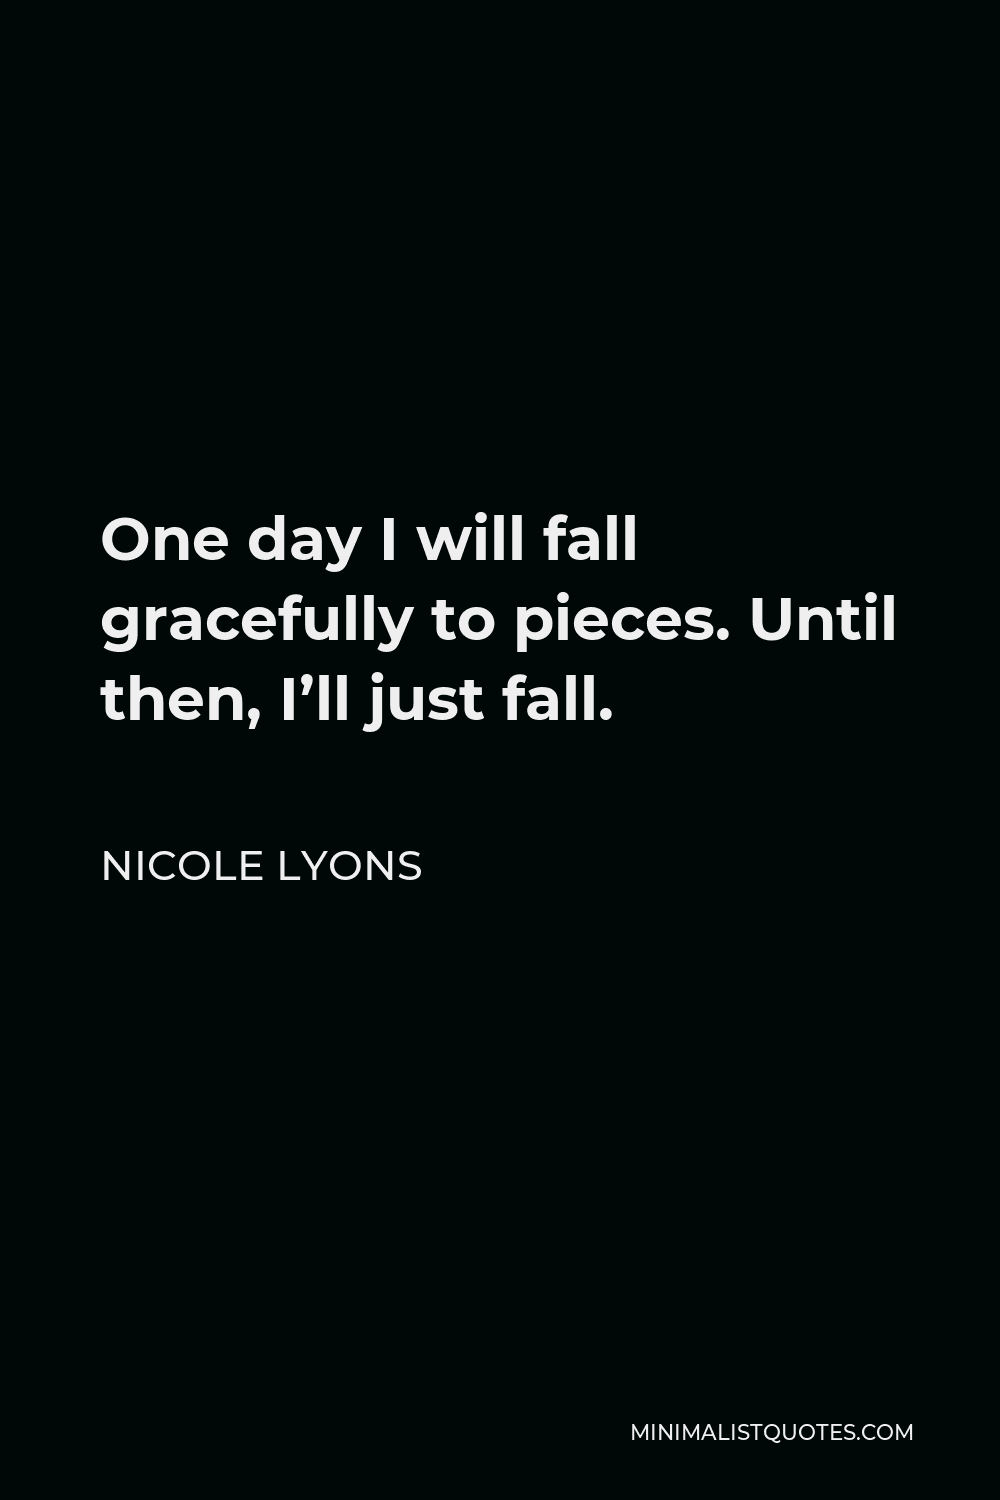 Nicole Lyons Quote - One day I will fall gracefully to pieces. Until then, I’ll just fall.